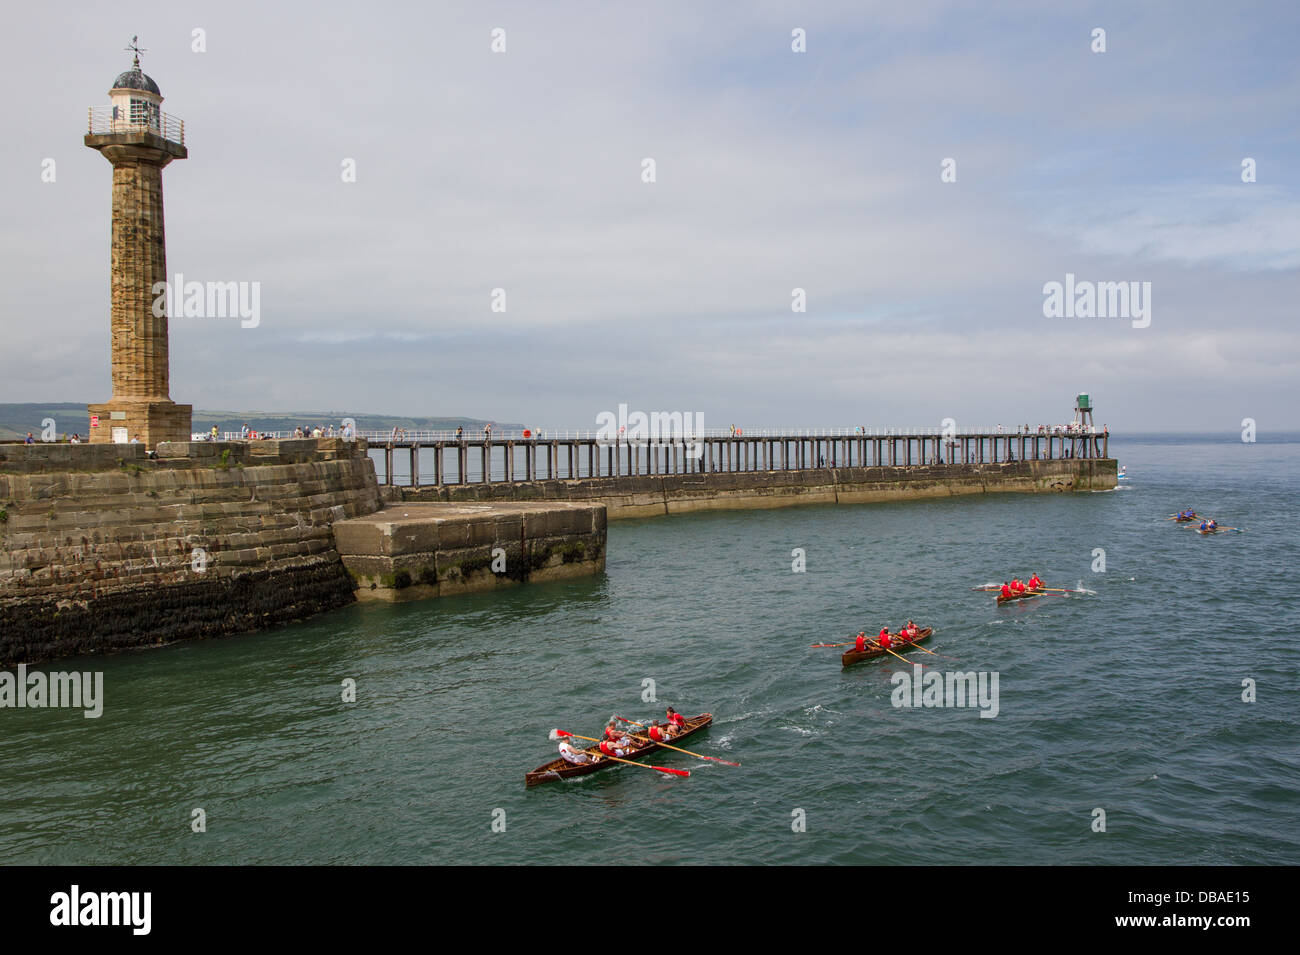 Rowing boat race in Whitby Harbour with the West Pier and lighthouses in background Stock Photo